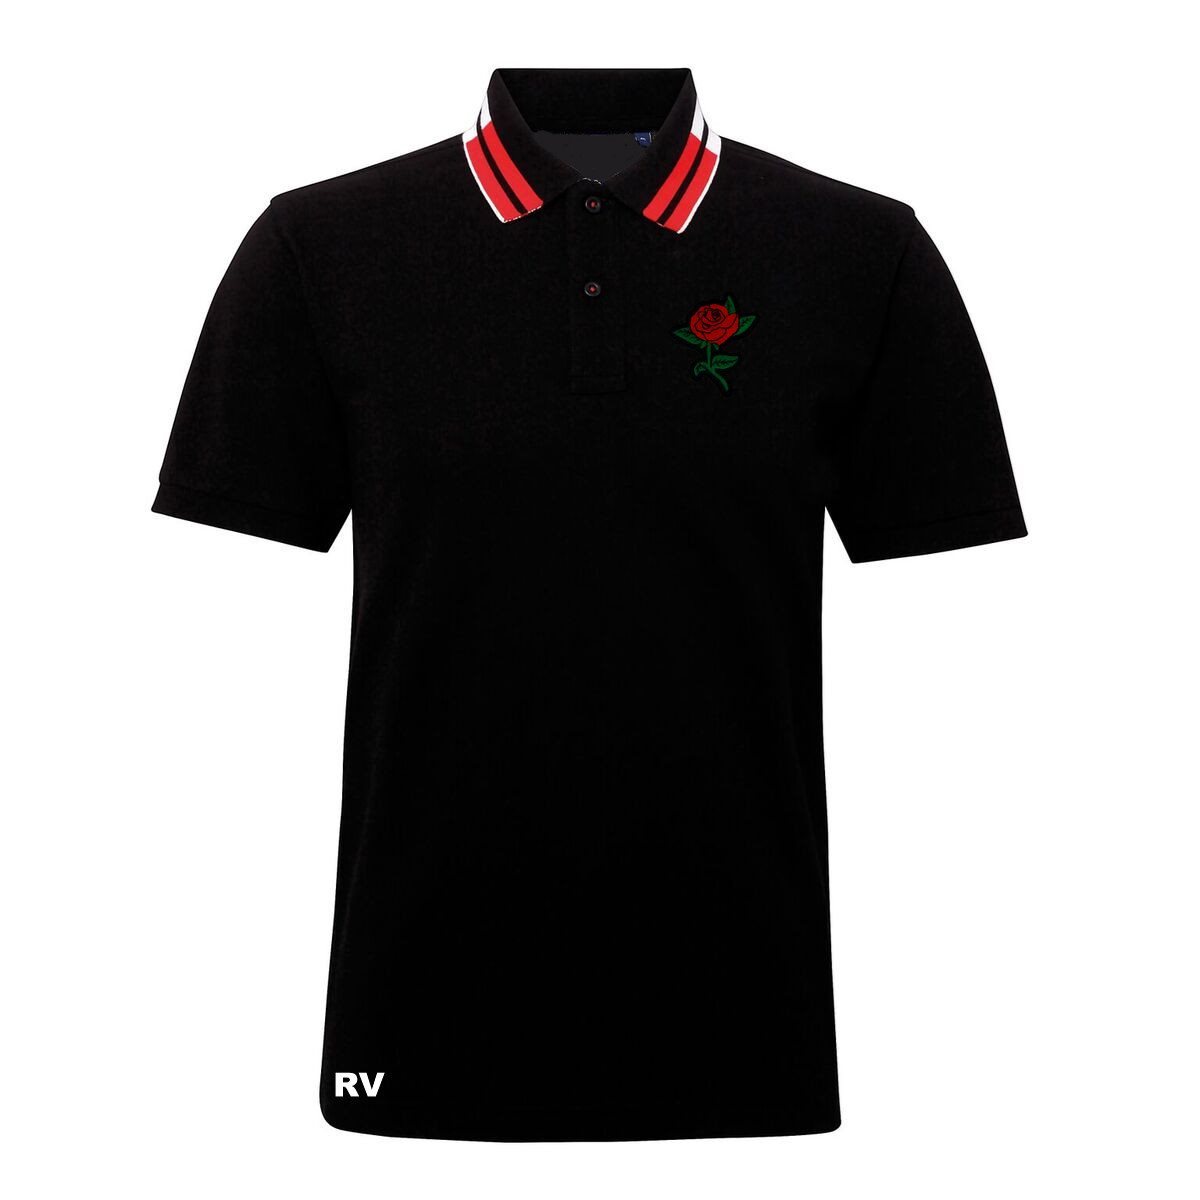 Rugby Vintage - England's Rose Twin Tipped Polo Shirt - Black/Red/White ...